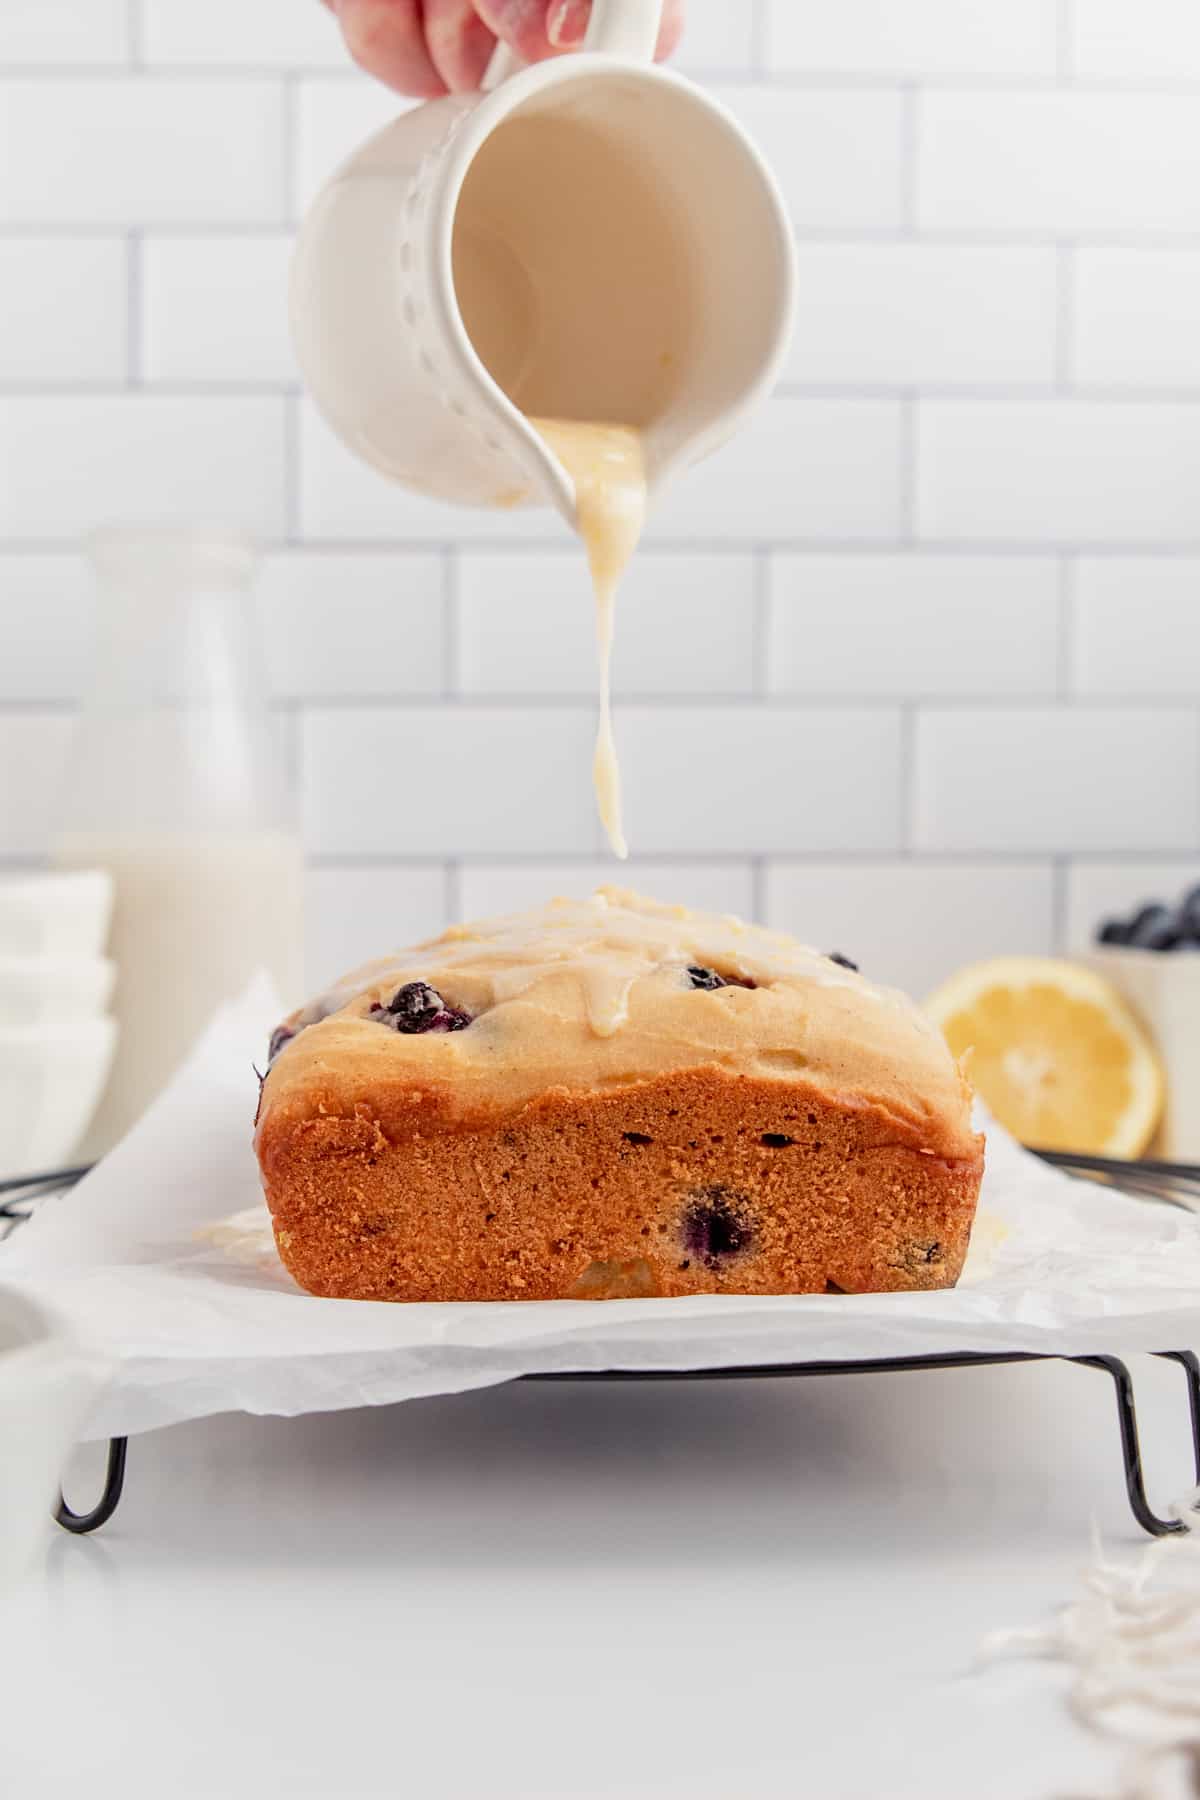 Gluten free lemon blueberry loaf being drizzled with lemon glaze.